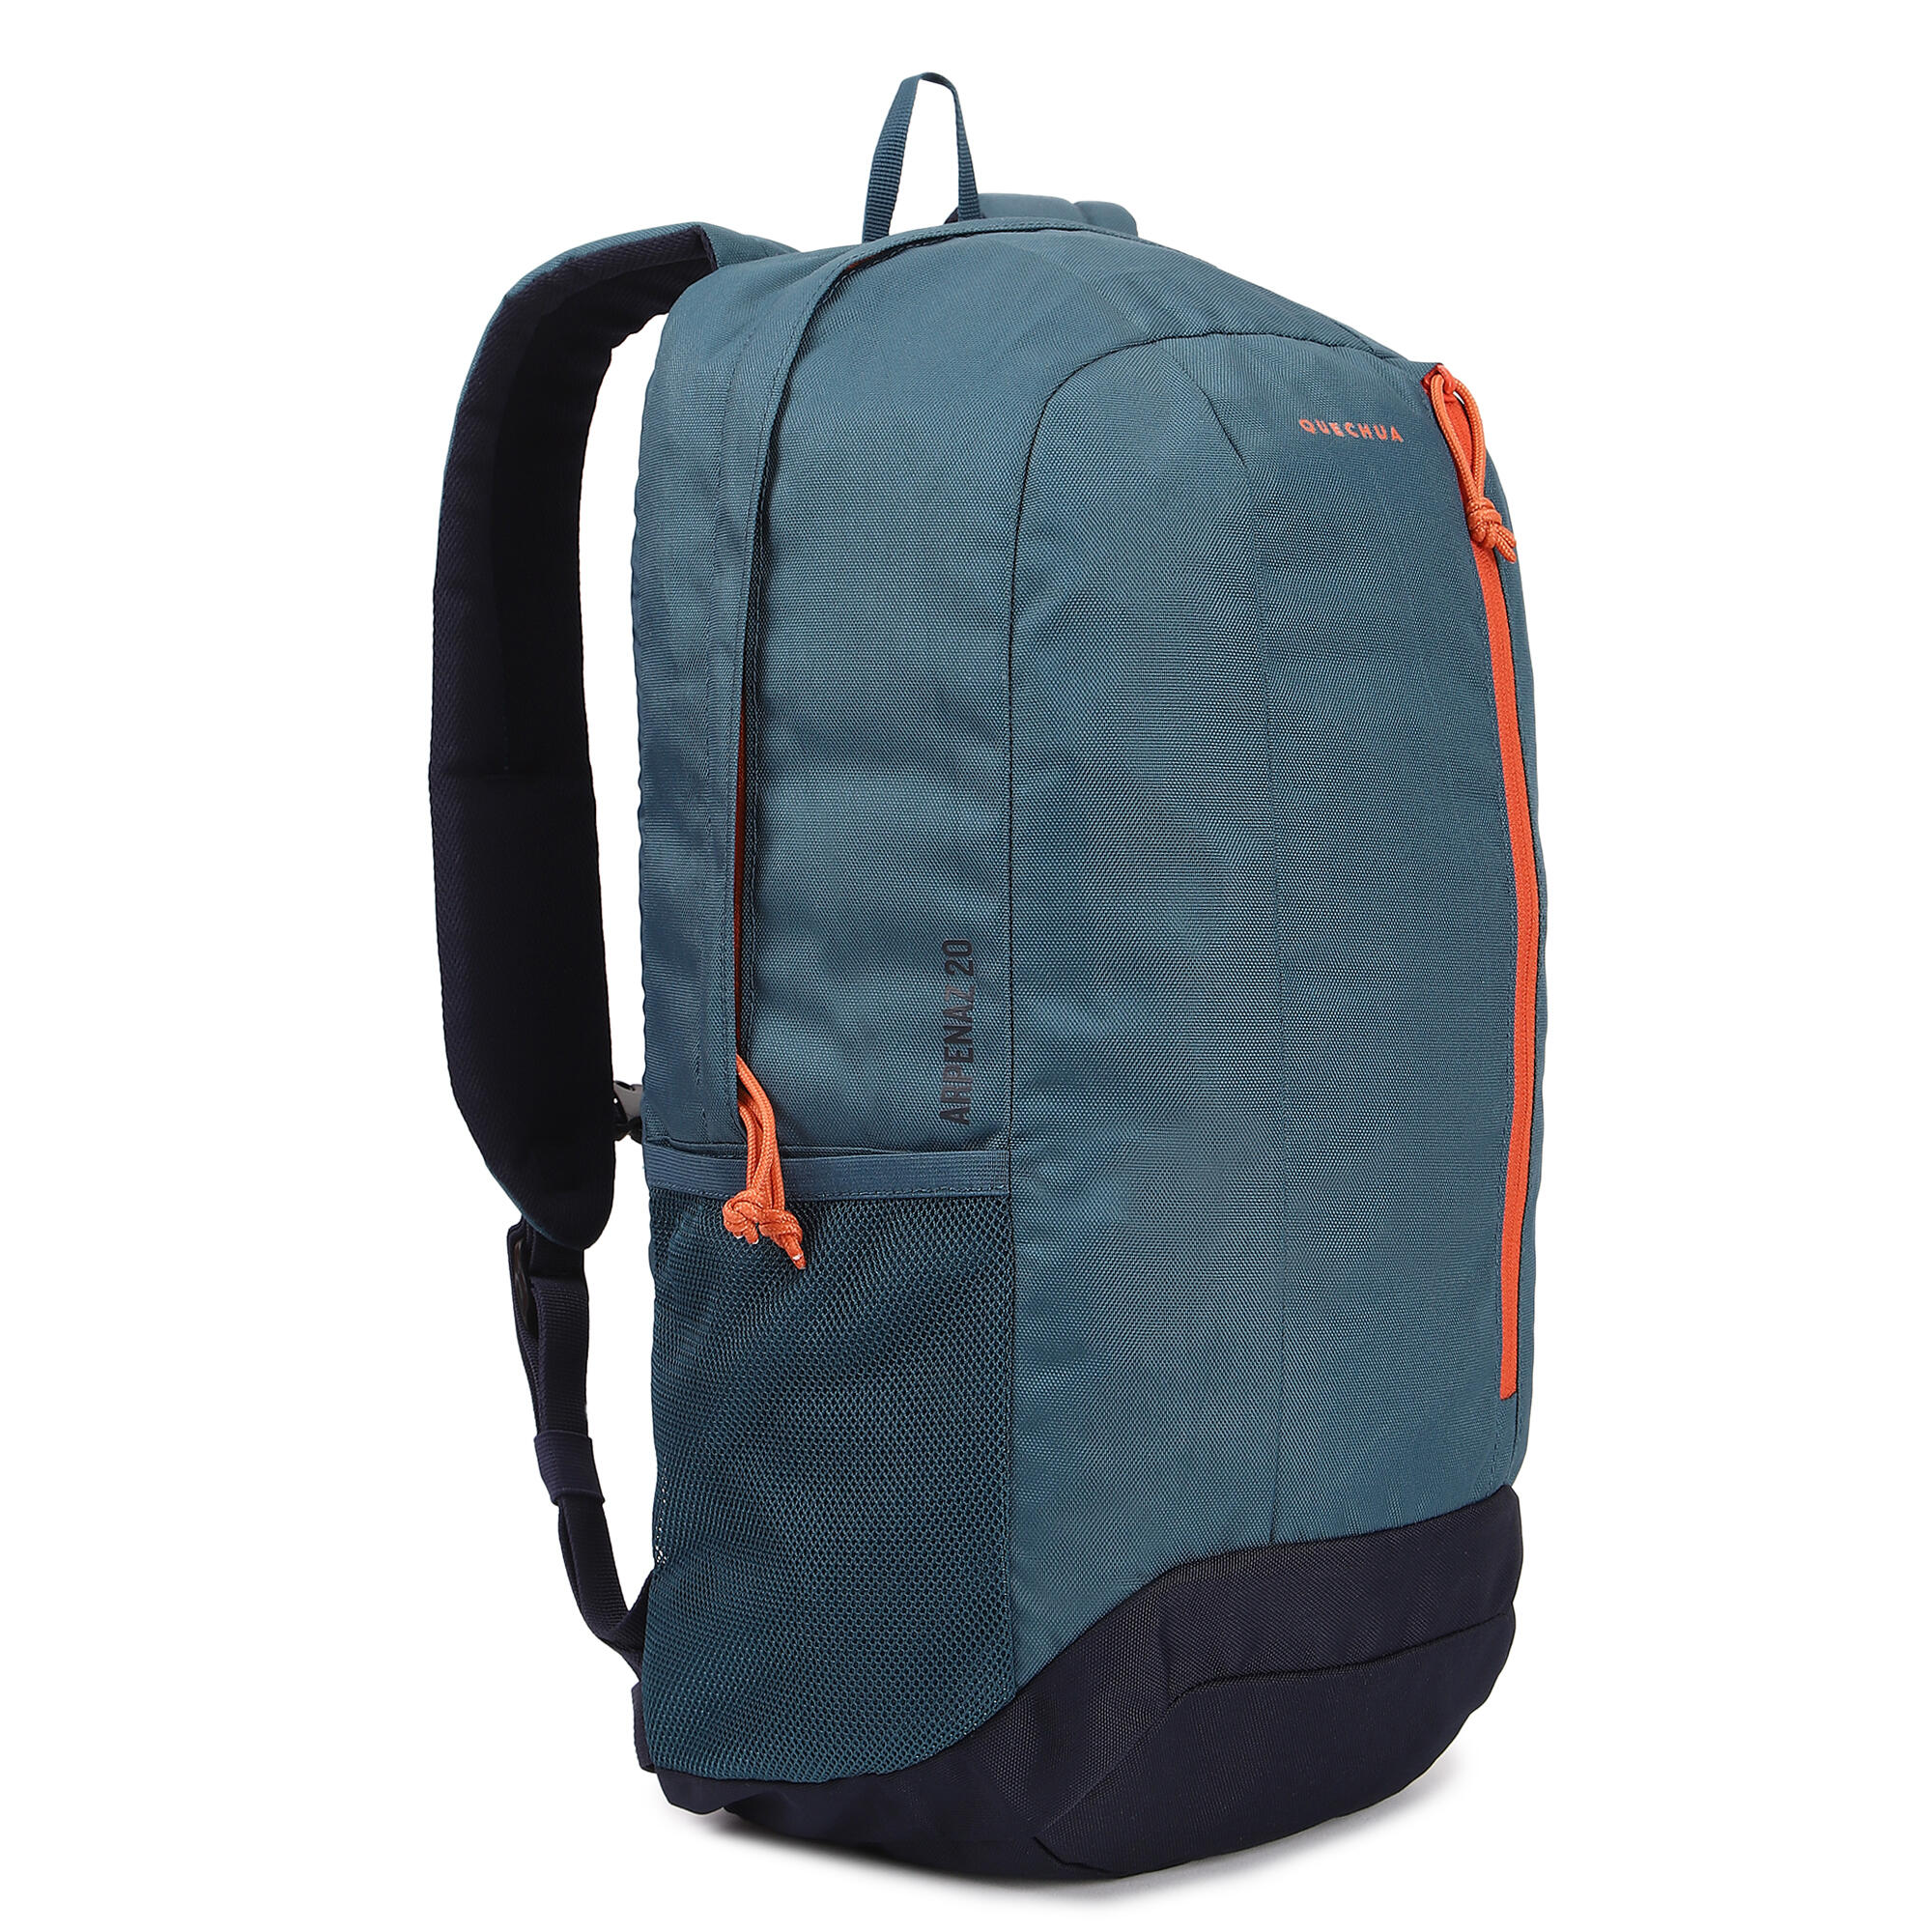 QUECHUA NH500 20-L Hiking Backpack - Blue : Amazon.in: Bags, Wallets and  Luggage